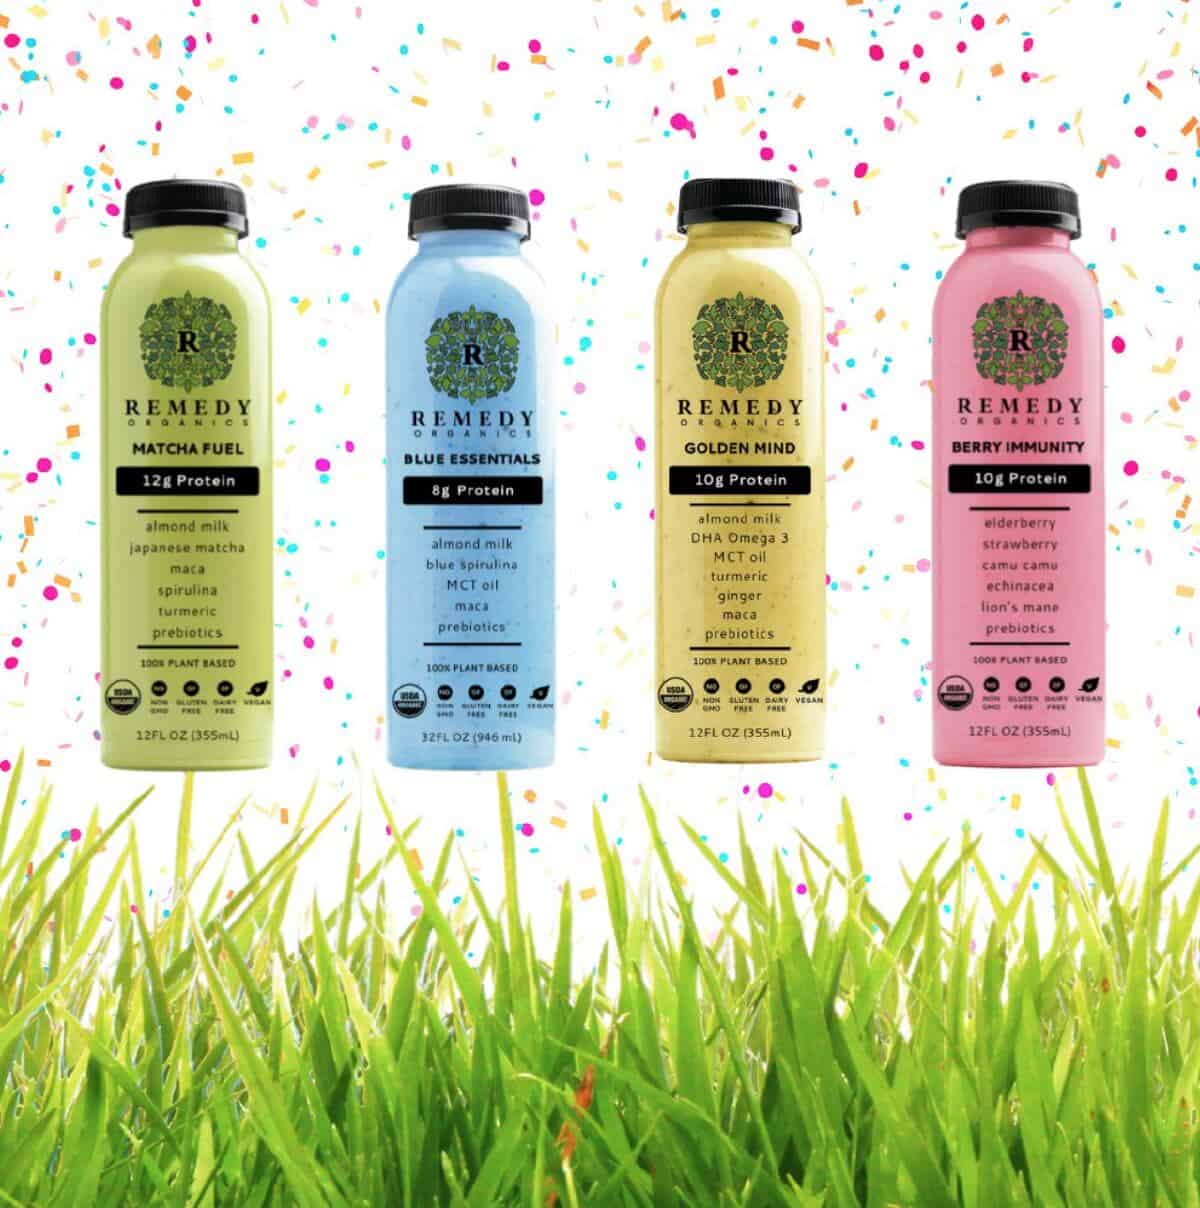 Four bottles of Remedy Organics plant-based protein shakes in light green, light blue, yellow and pink against a background of grass and confetti.